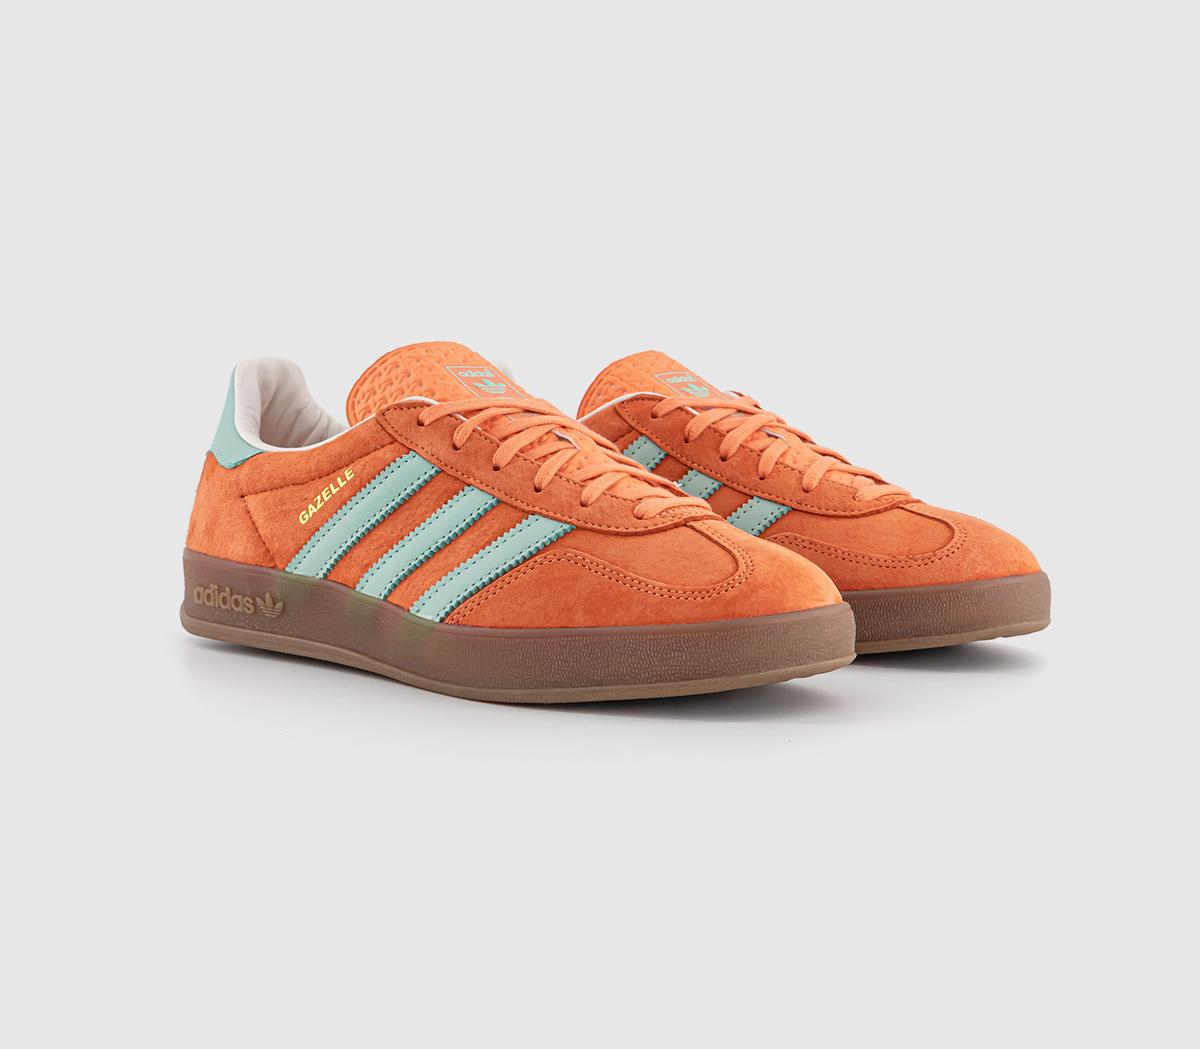 Adidas Gazelle Indoor Trainers Easy Orange Clear Mint Gum Red, 9.5